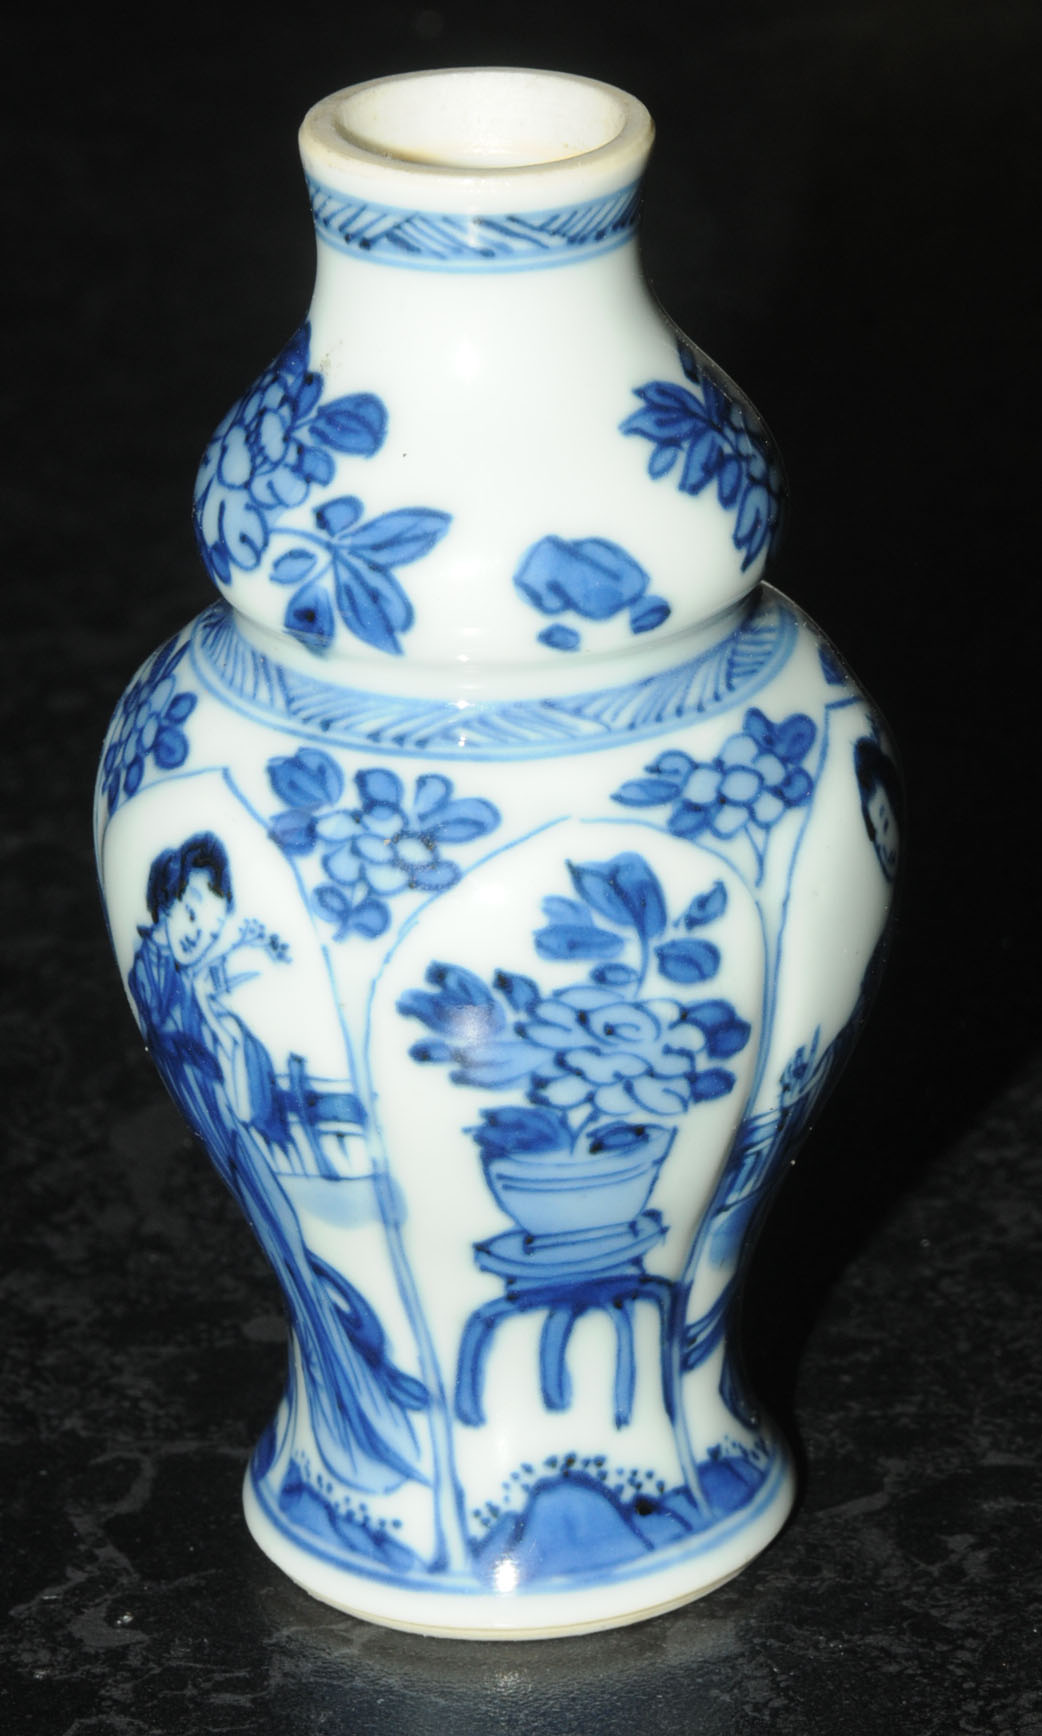 An early 20th century Chinese blue and white porcelain miniature baluster vase with lobbed sides, - Image 5 of 7